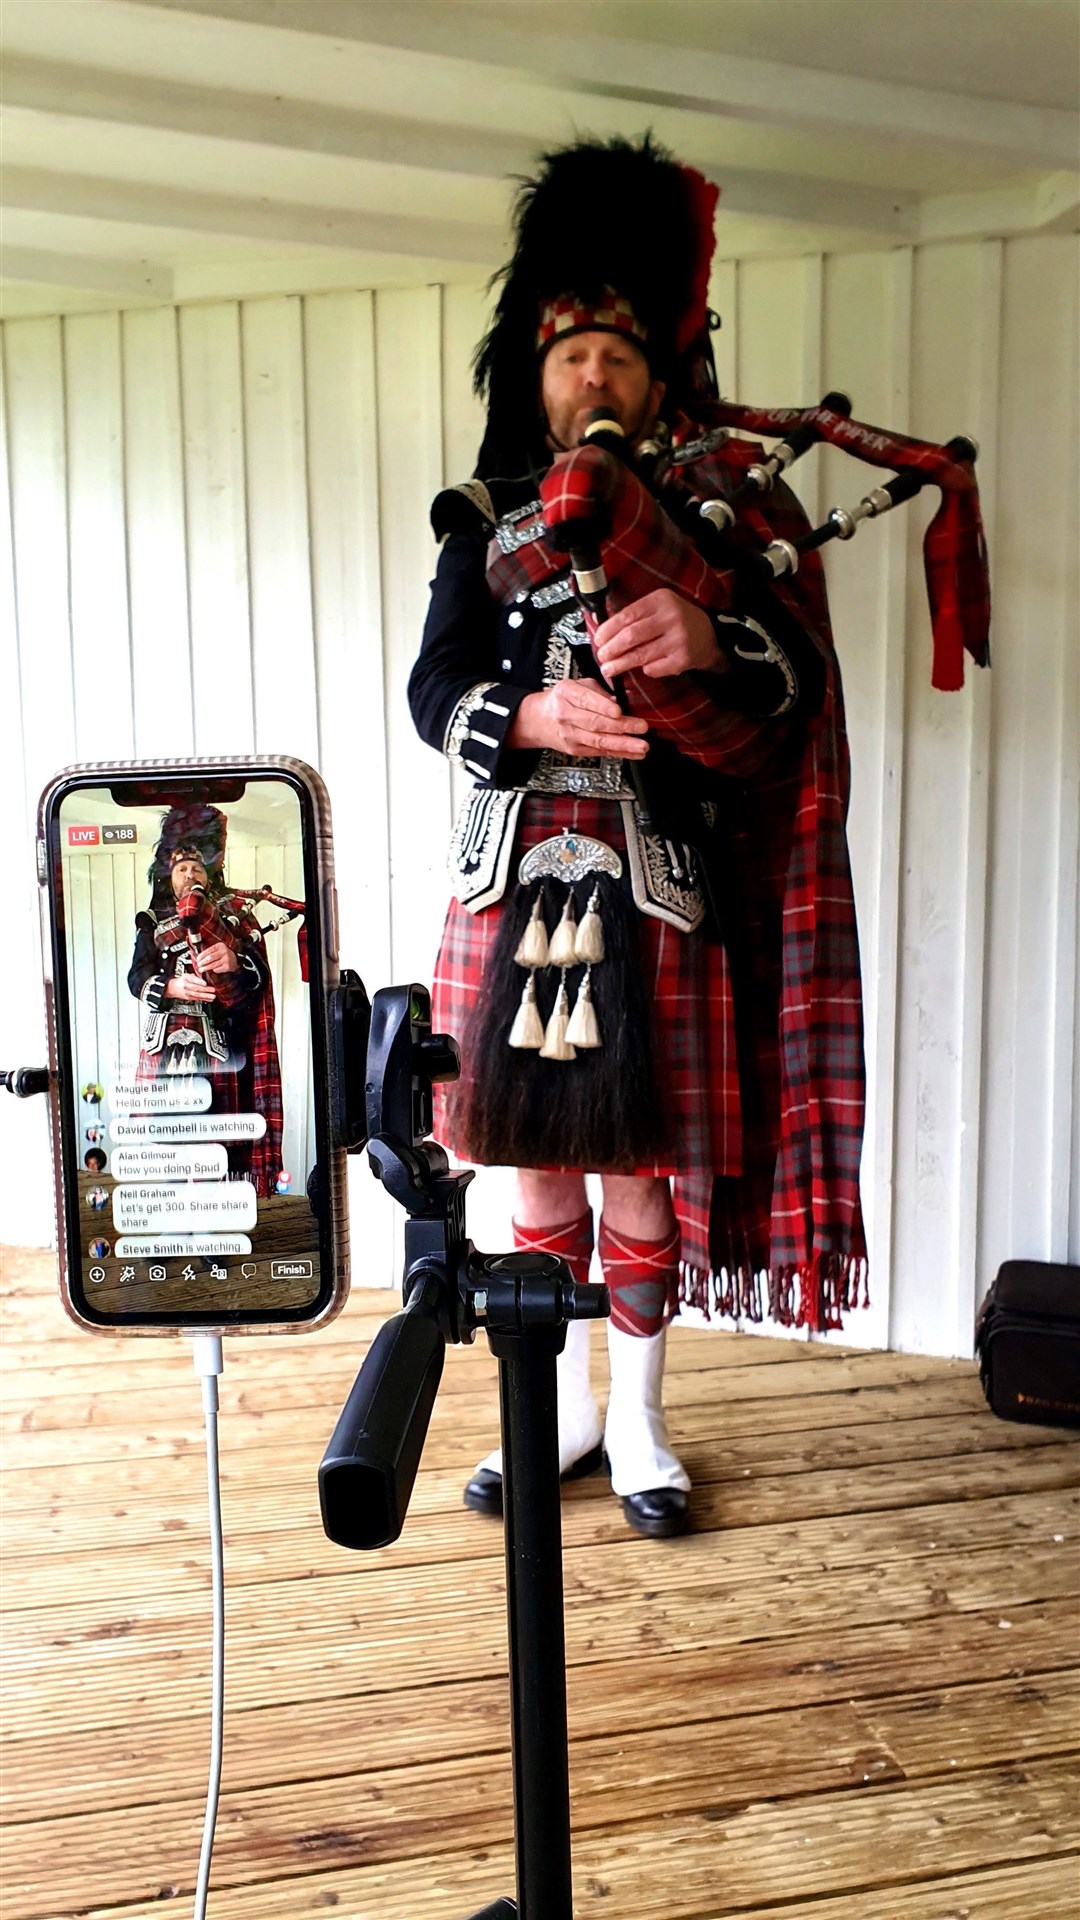 Spud the Piper will be performing from his garden this Friday evening and every week during the lockdown.